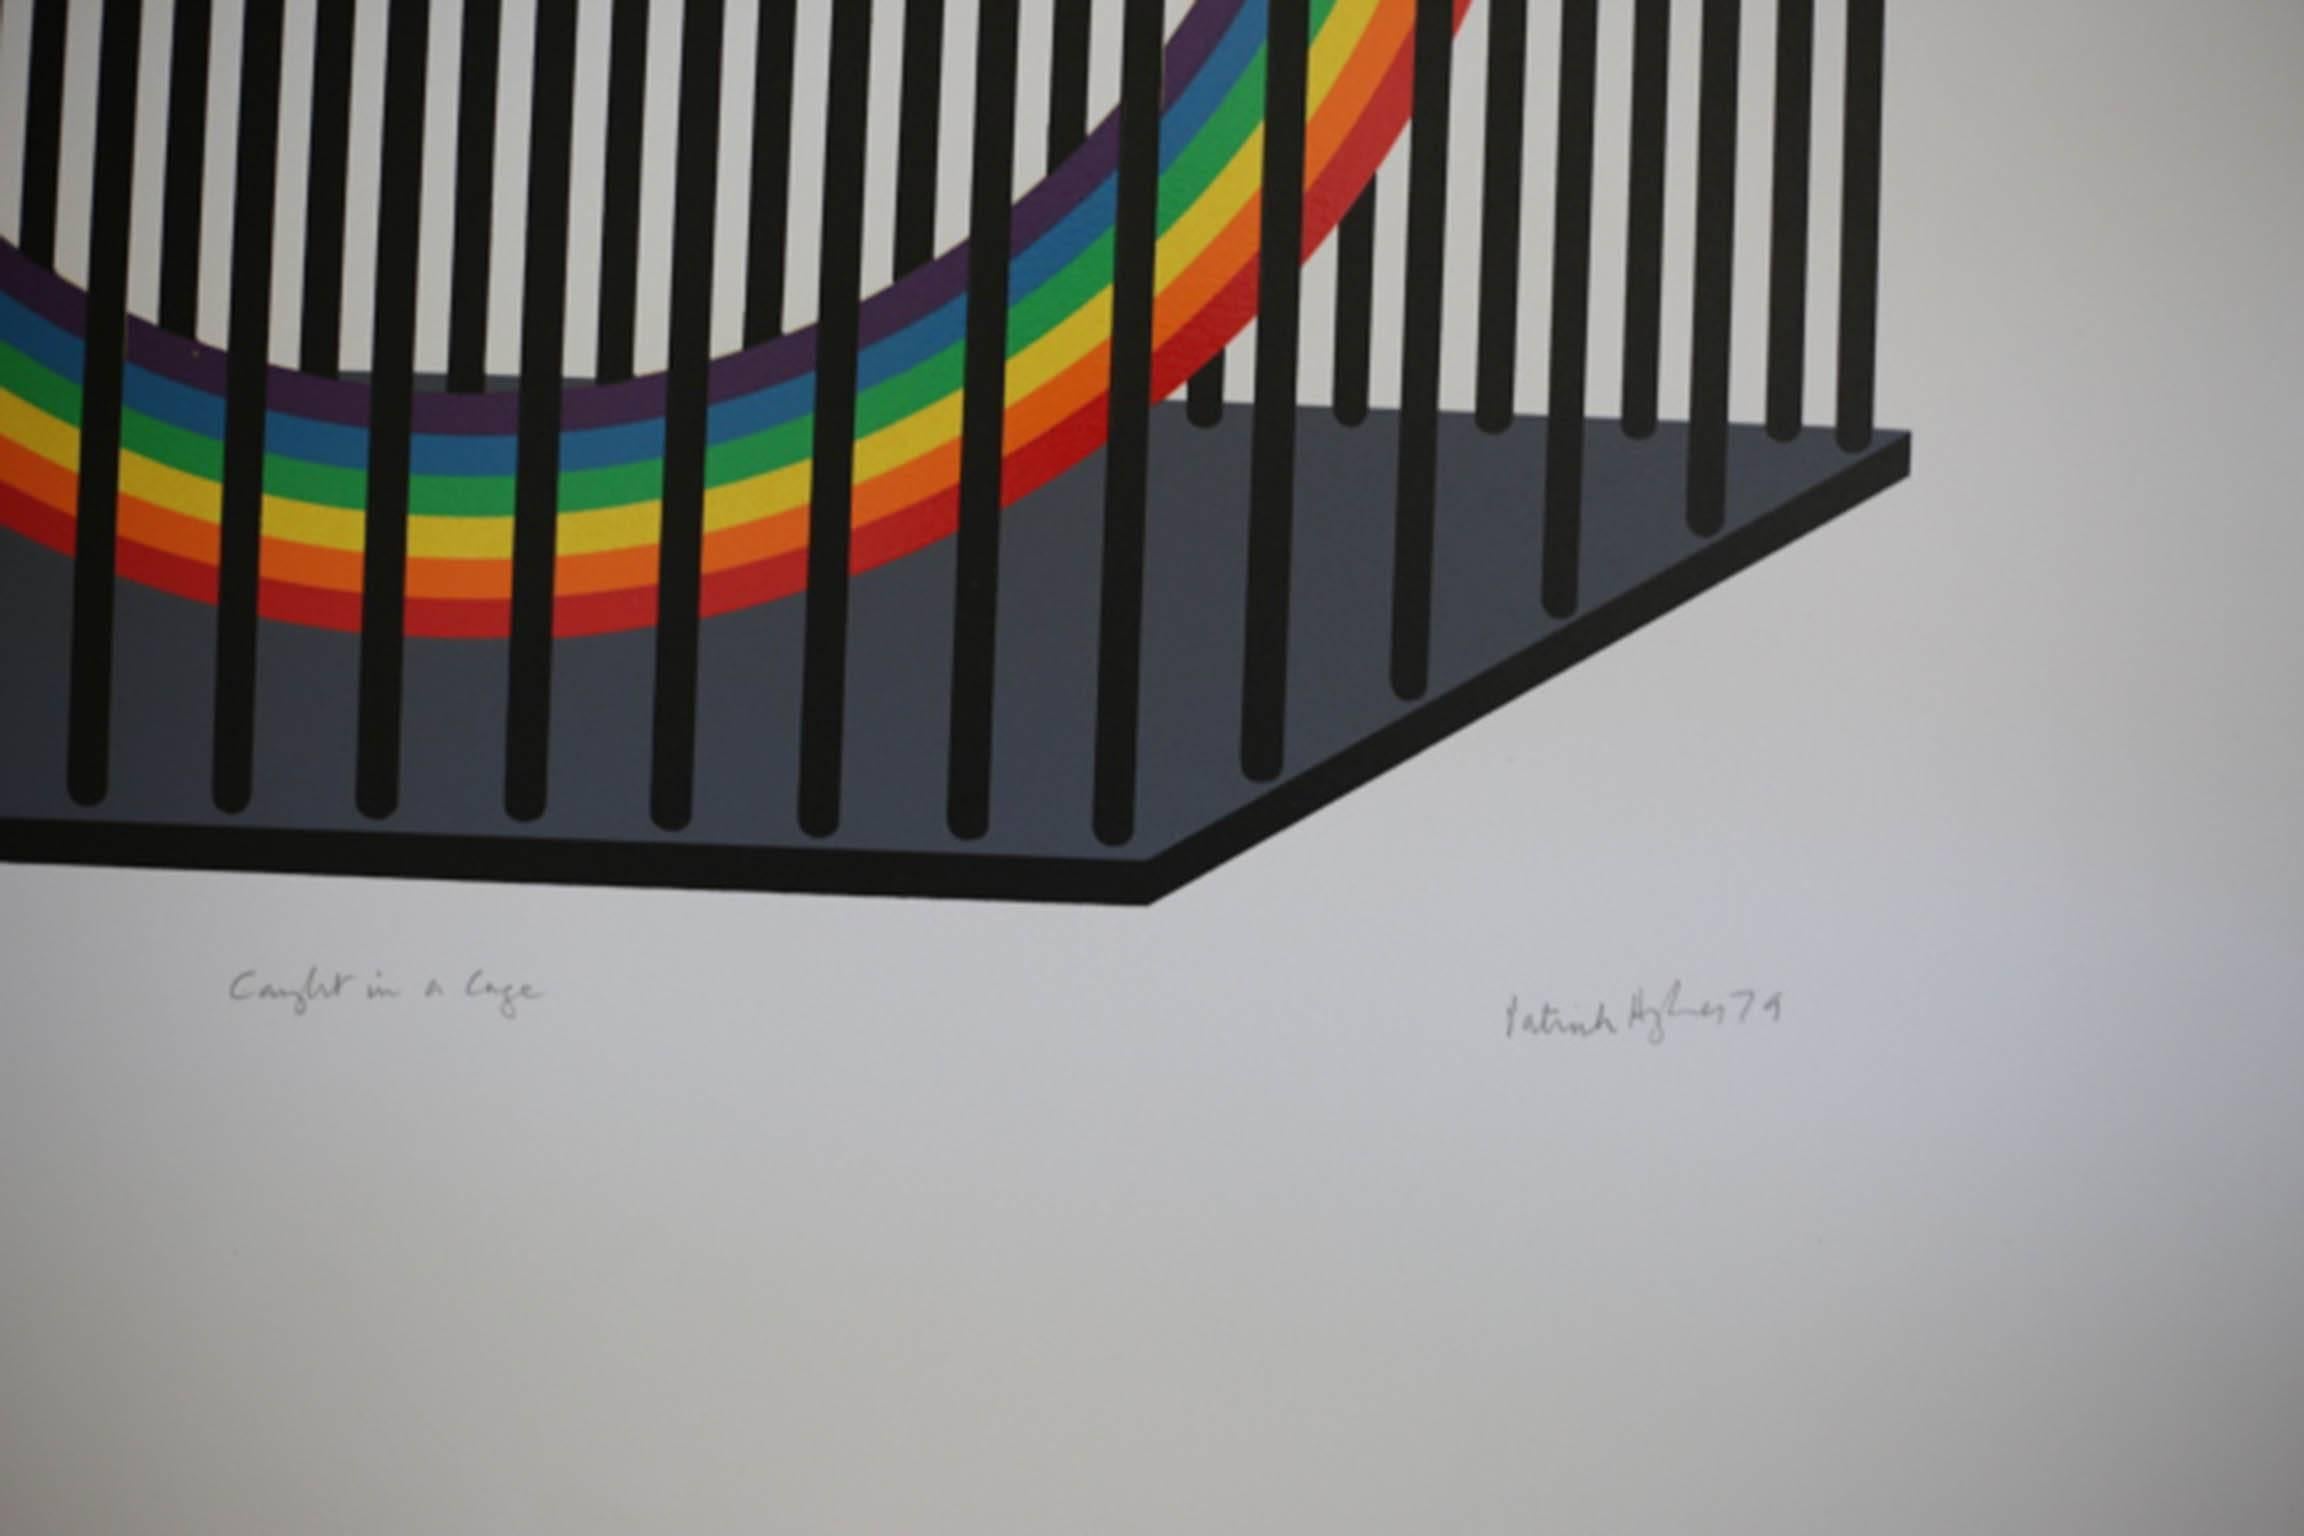 Artist: Patrick Hughes, British (1939)
Title: Caught in a Cage
Year: 1979
Medium: Silkscreen, signed and numbered in pencil #2/10
Image size: 19